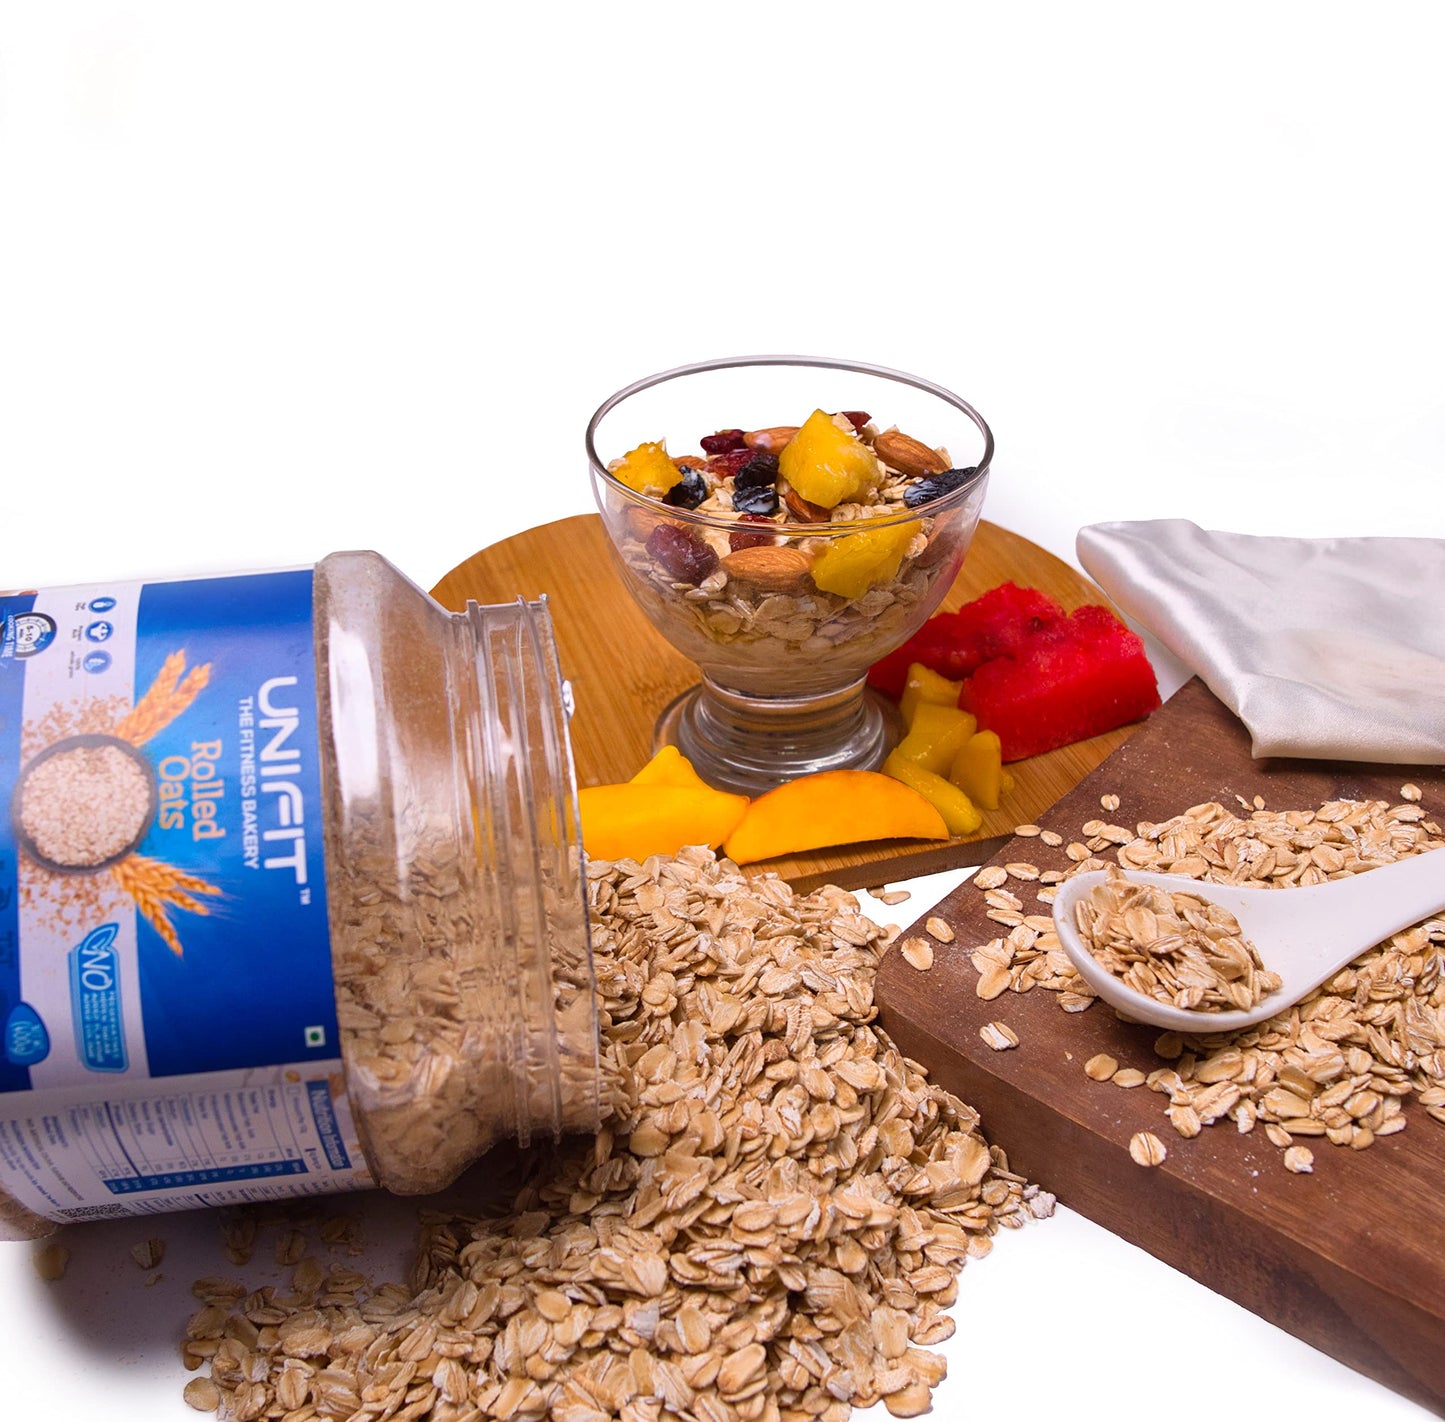 UNIFIT Rolled Oats